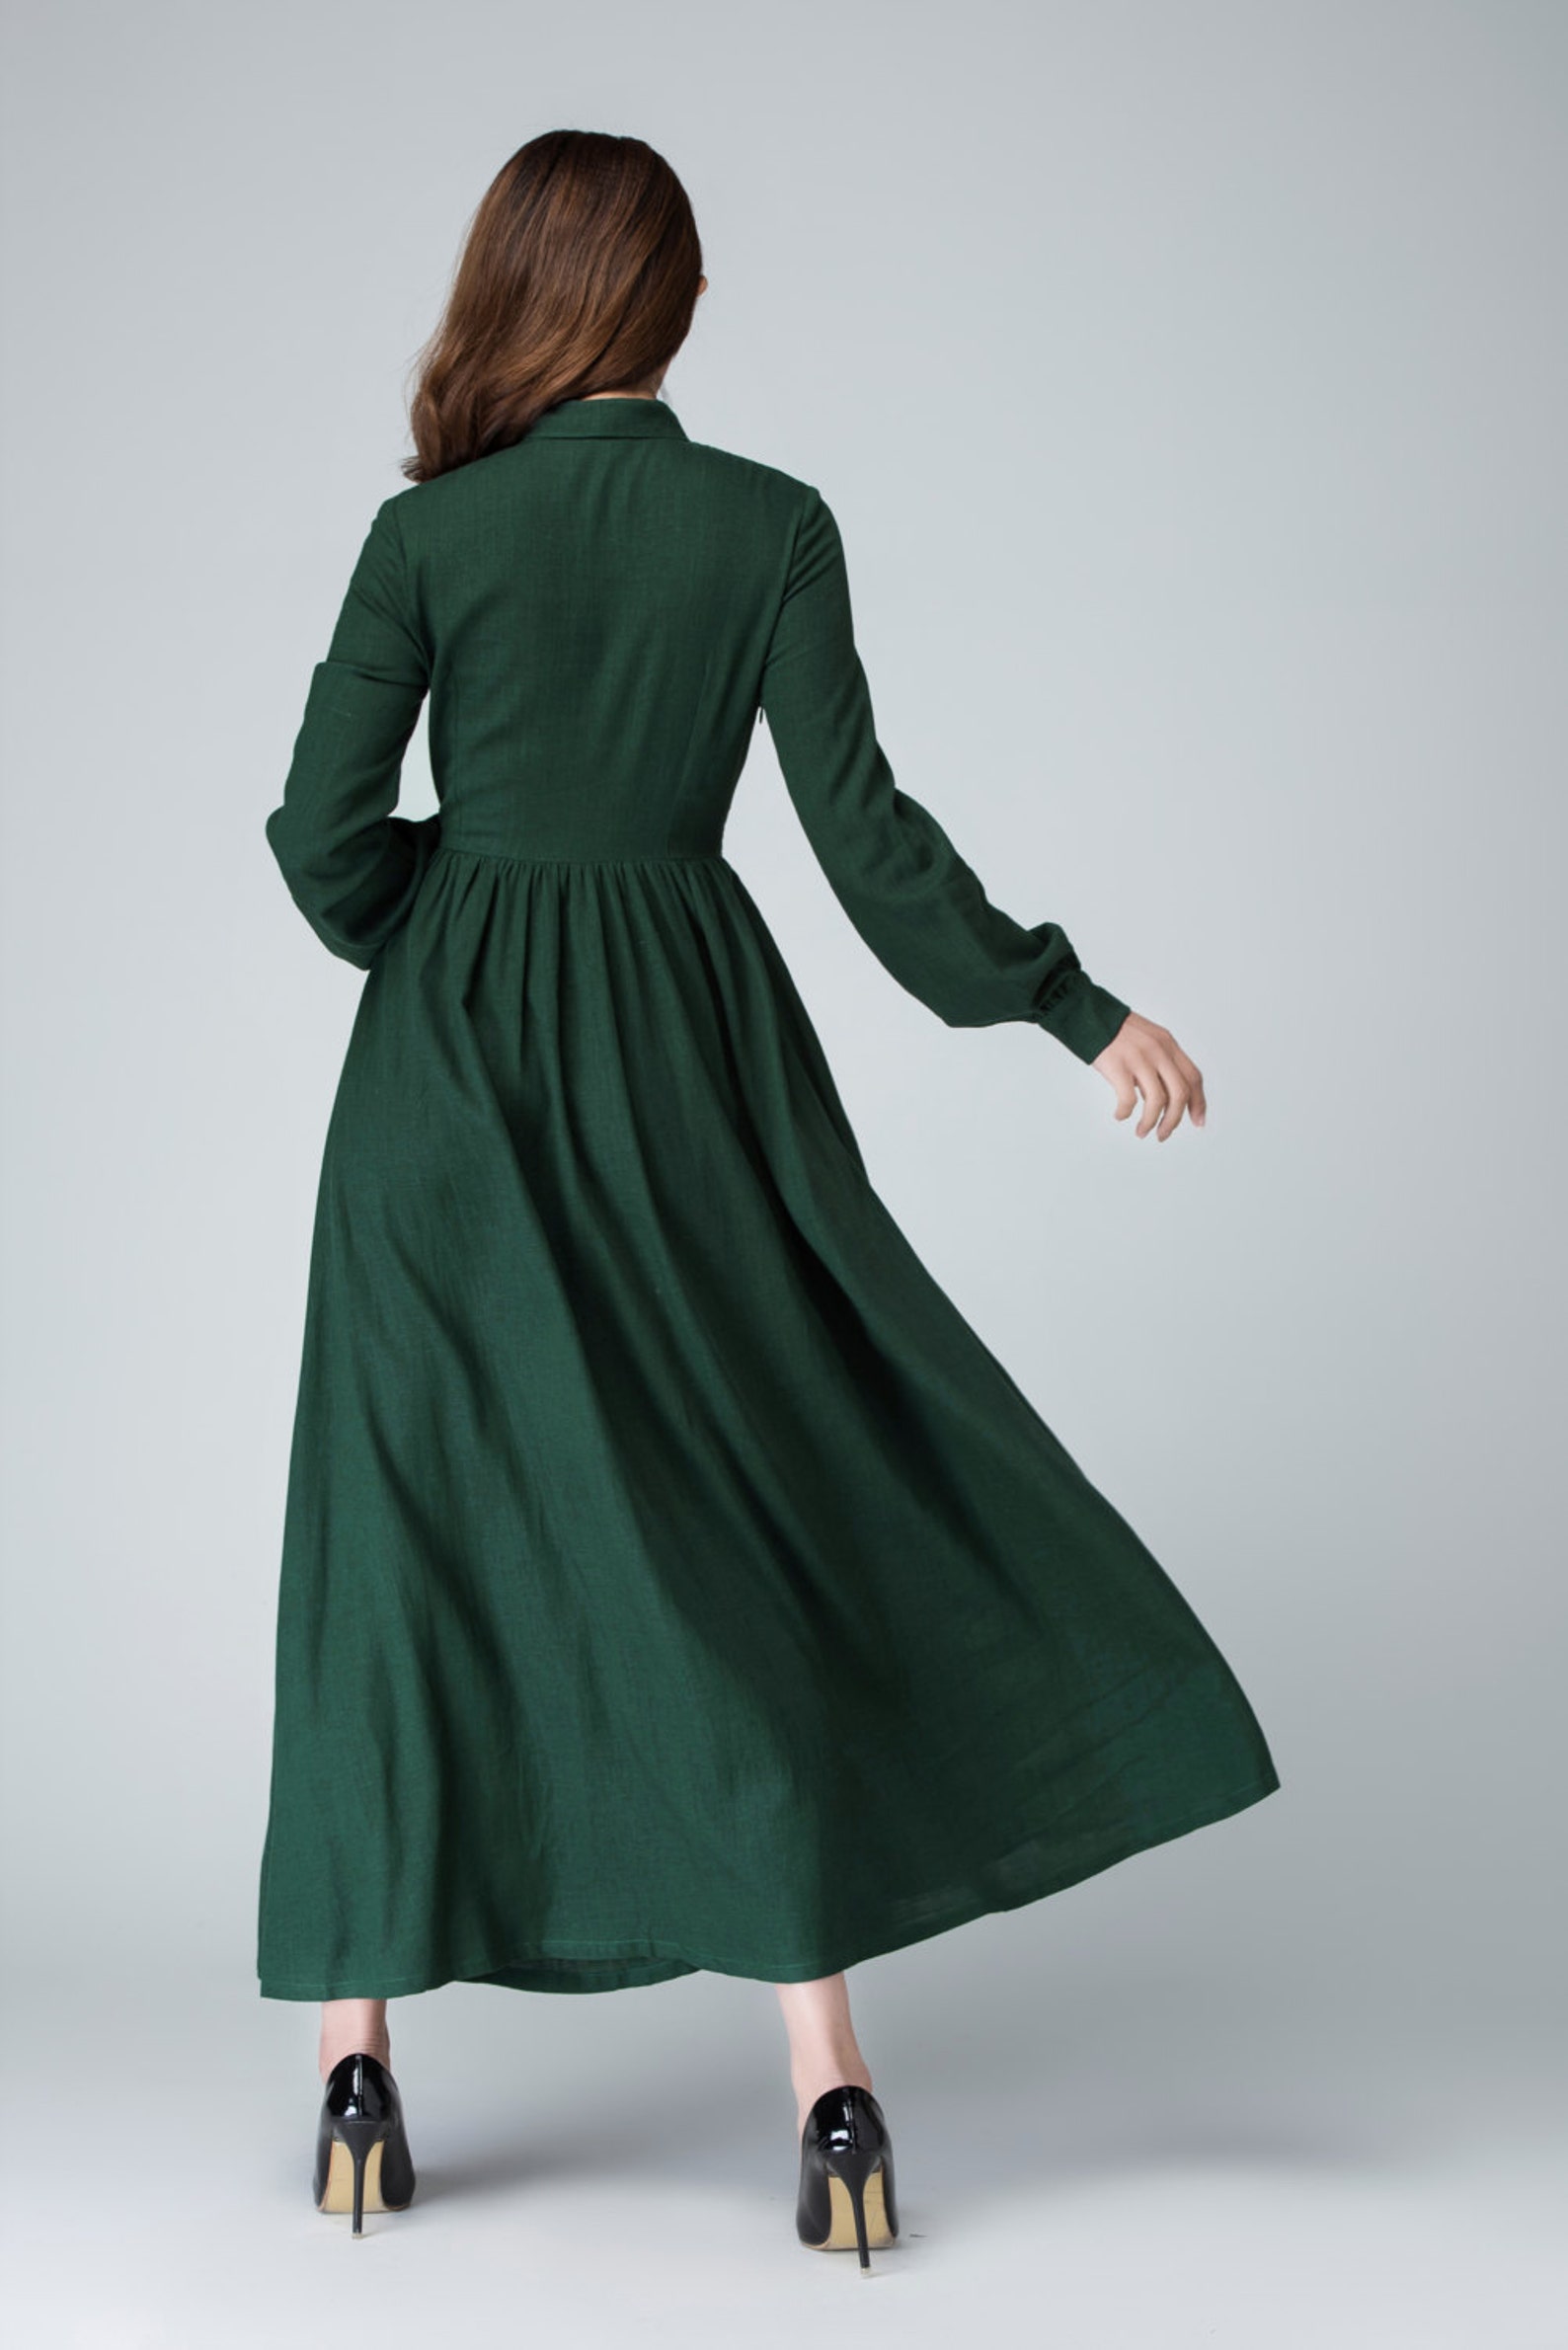 Women's Vintage Inspired Long Sleeve Medieval Maxi Dress - Etsy